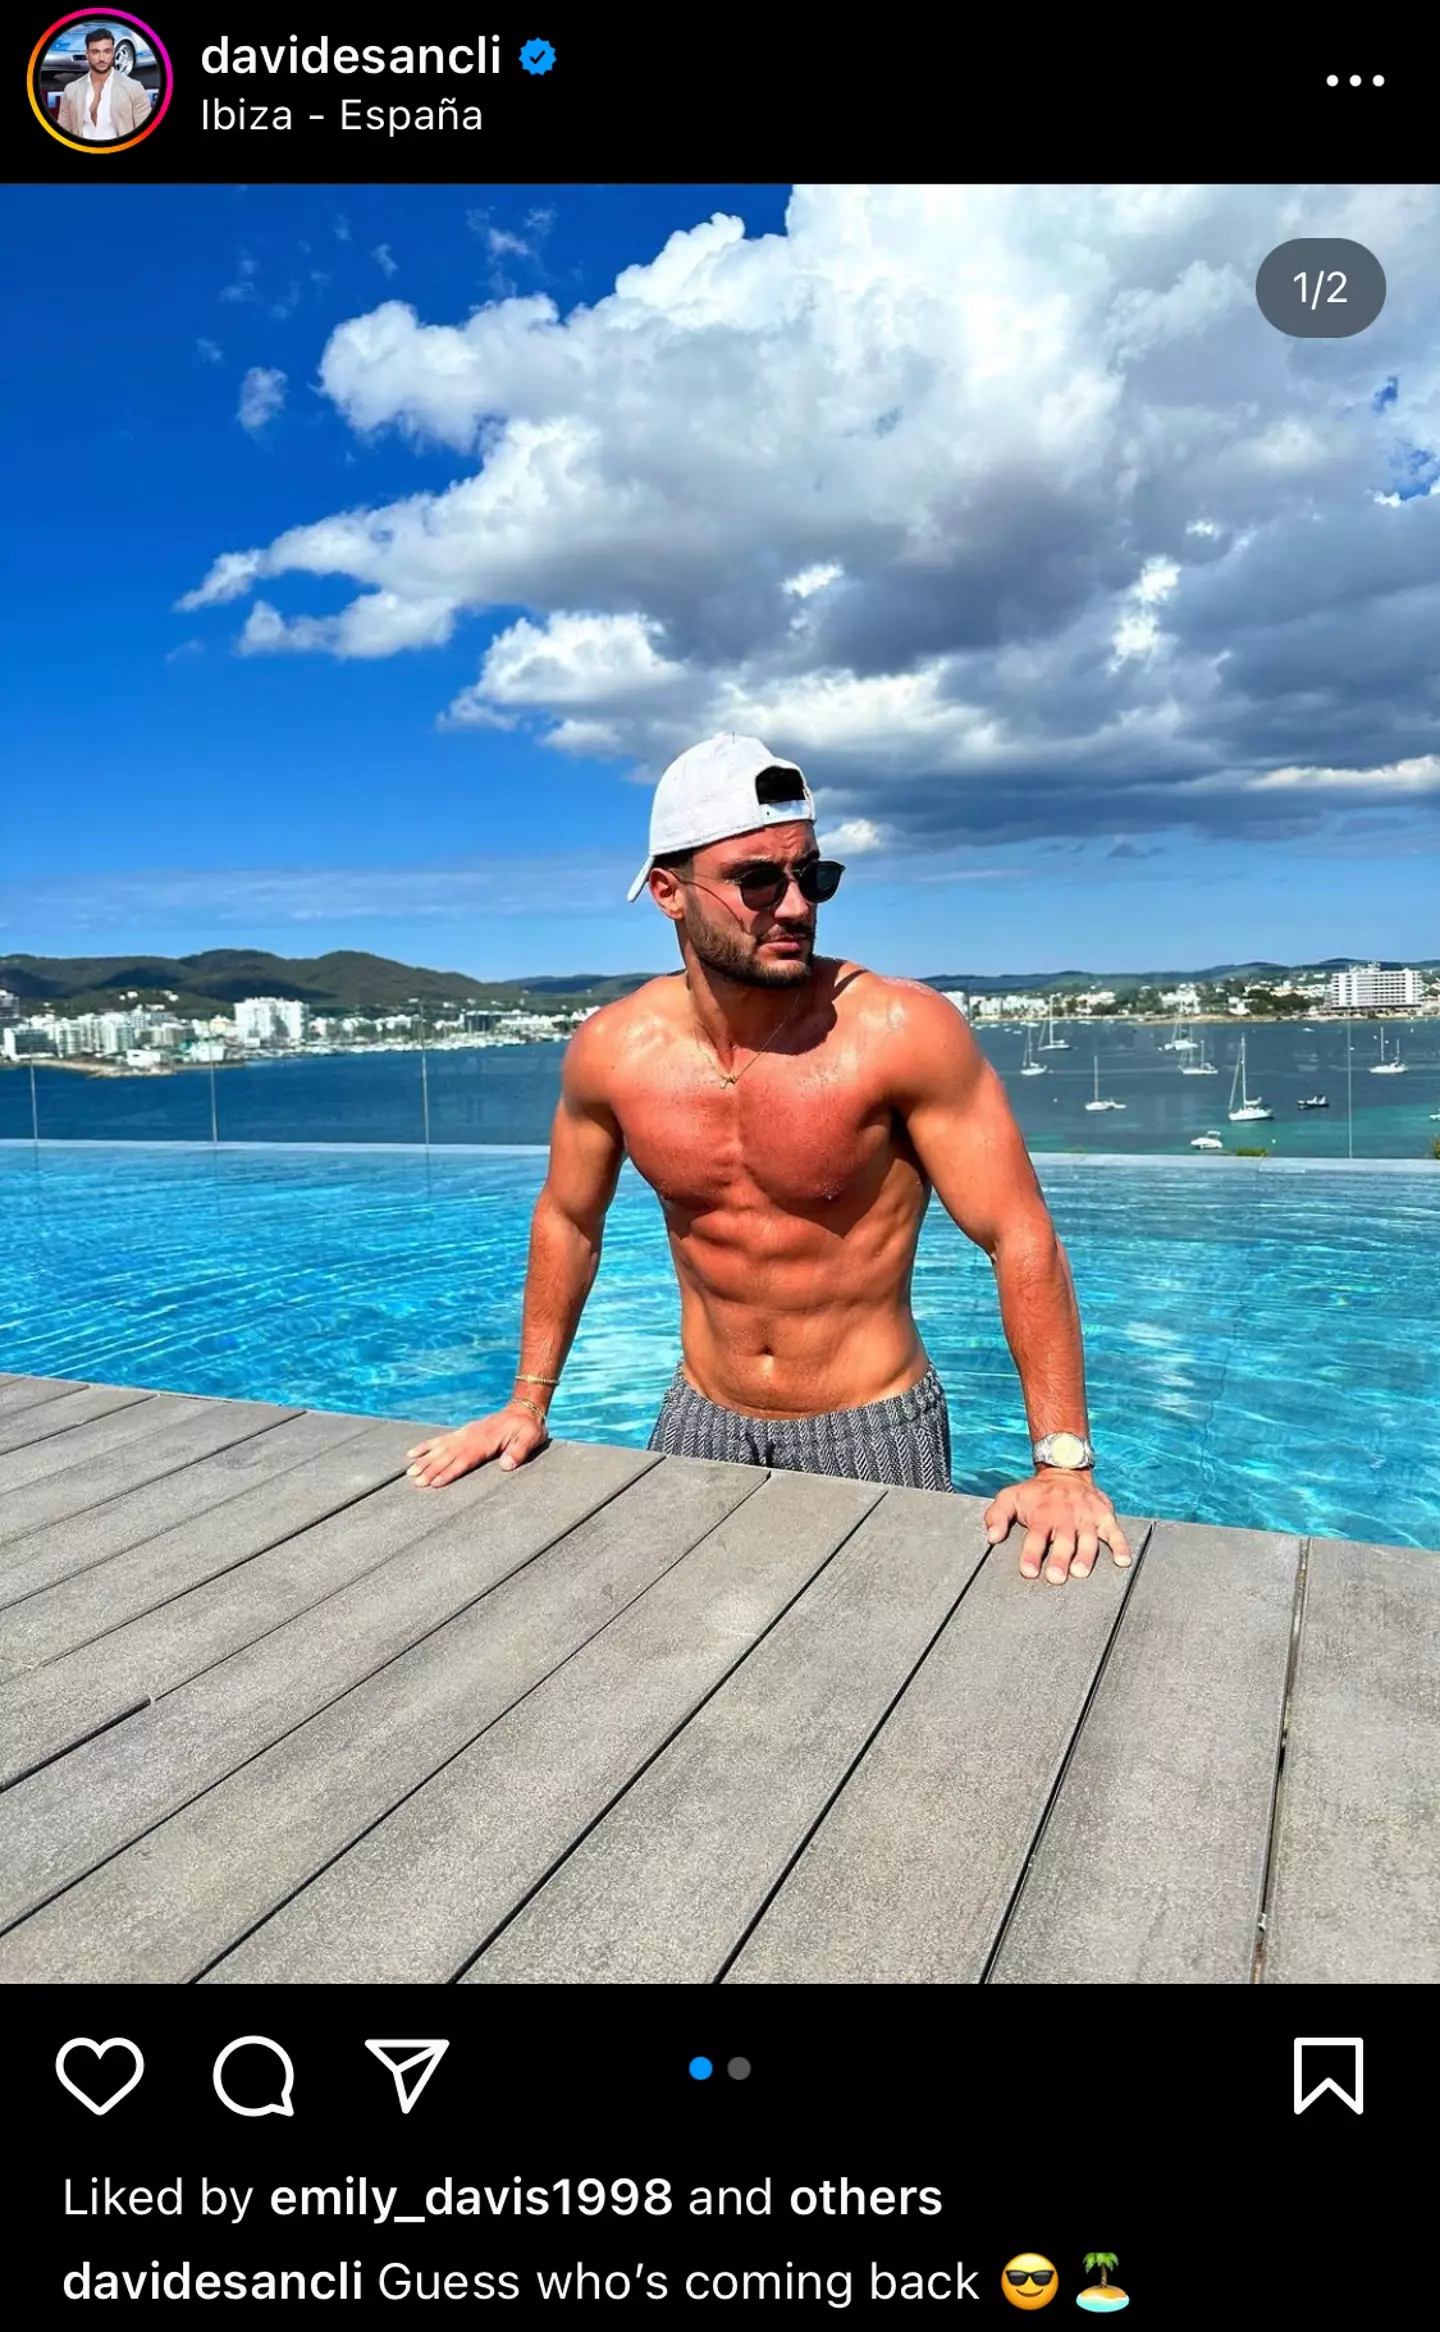 Davide hinted he might be returning to Love Island.